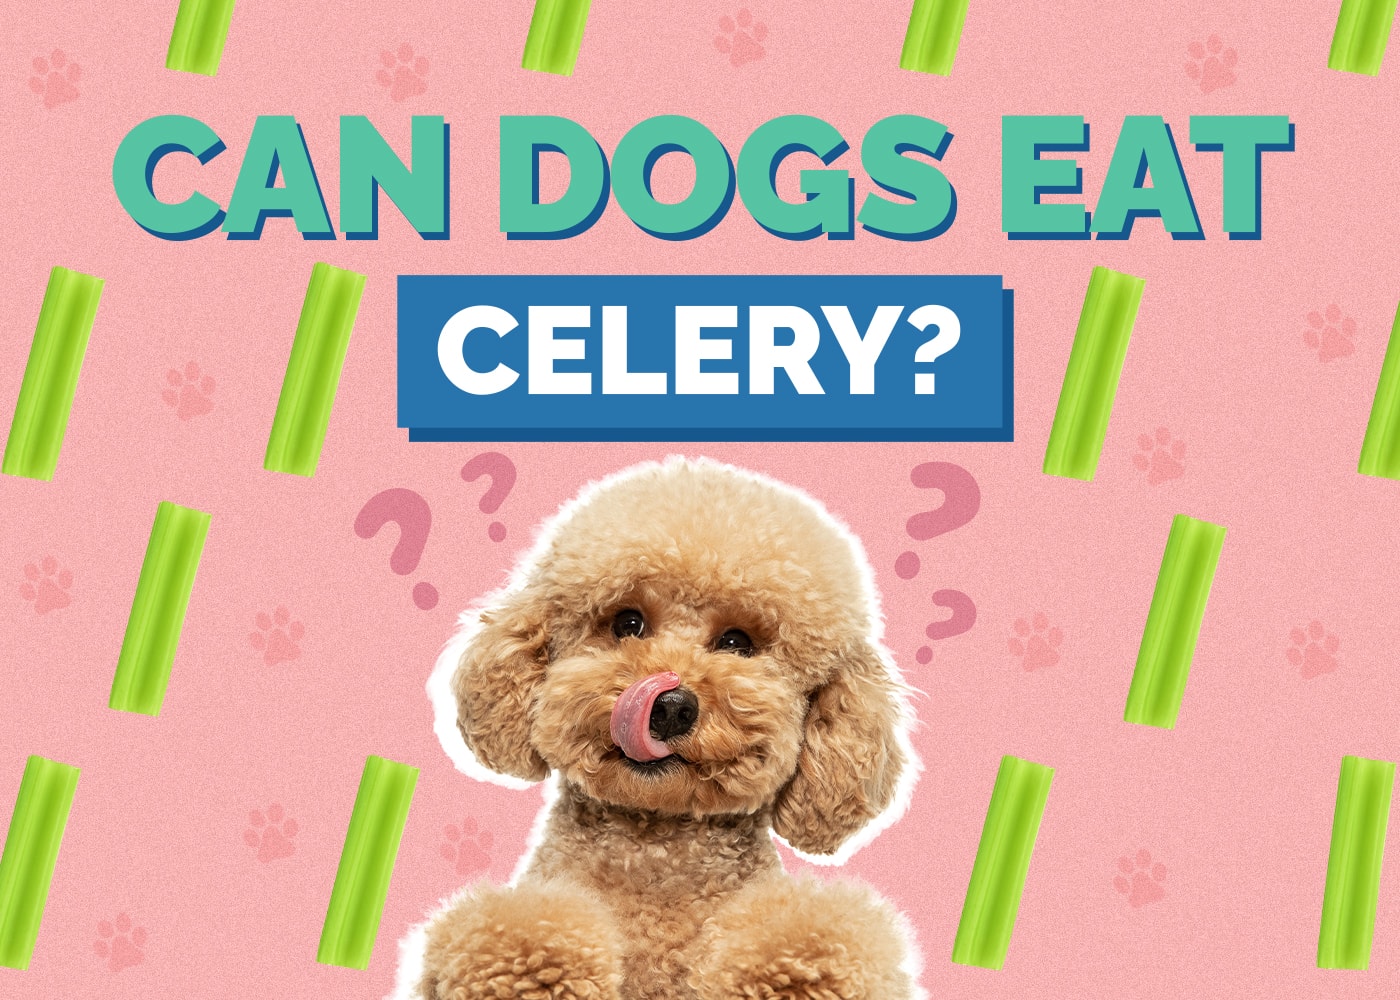 Can Dog Eat celery